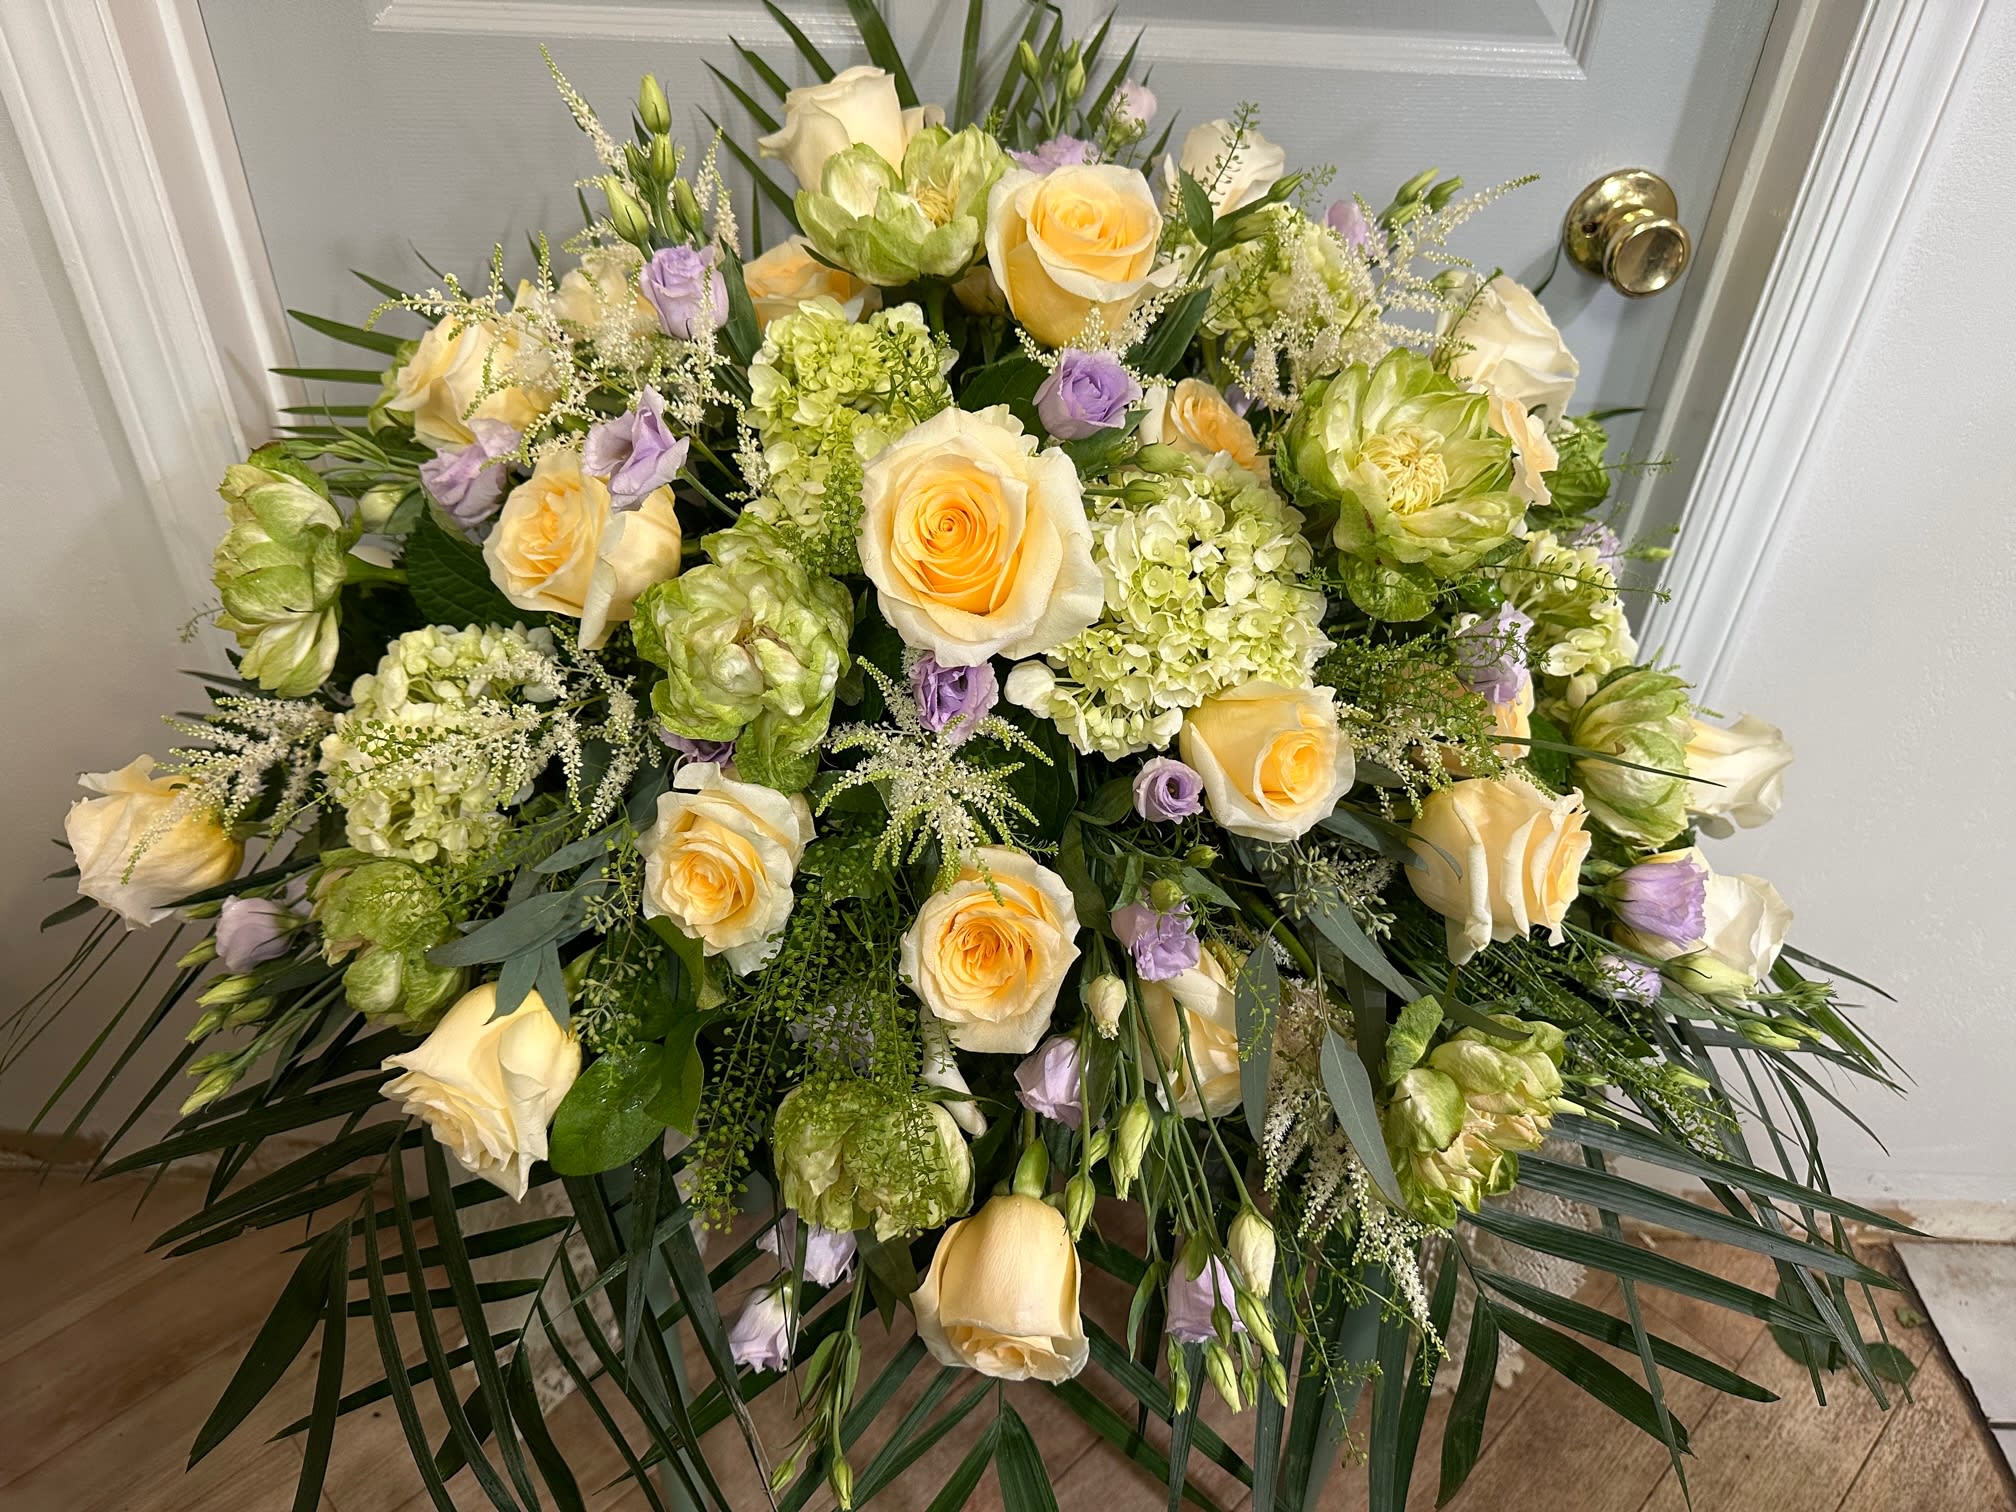 Soft Yellow  Rose  Half  Casket - Butter colored Roses,  Veggie Roses,   Hydrangea,  Lisianthus,  Fancy Greens